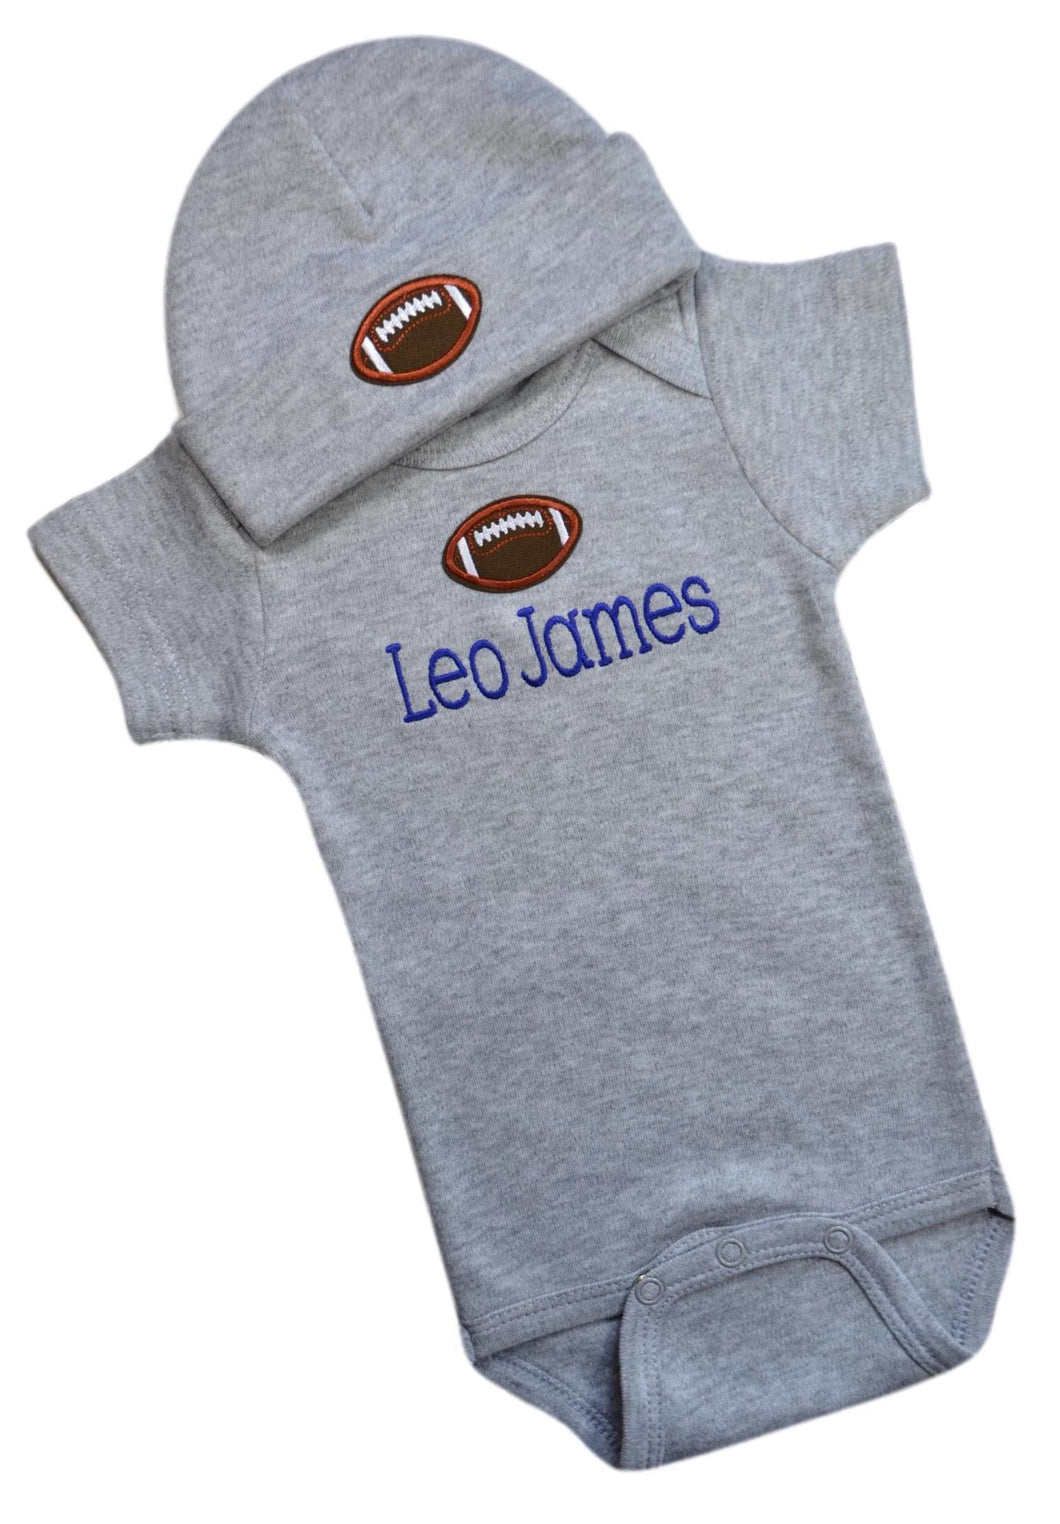 Personalized Embroidered Baby Boys Football Bodysuit with Matching Cotton Beanie Hat